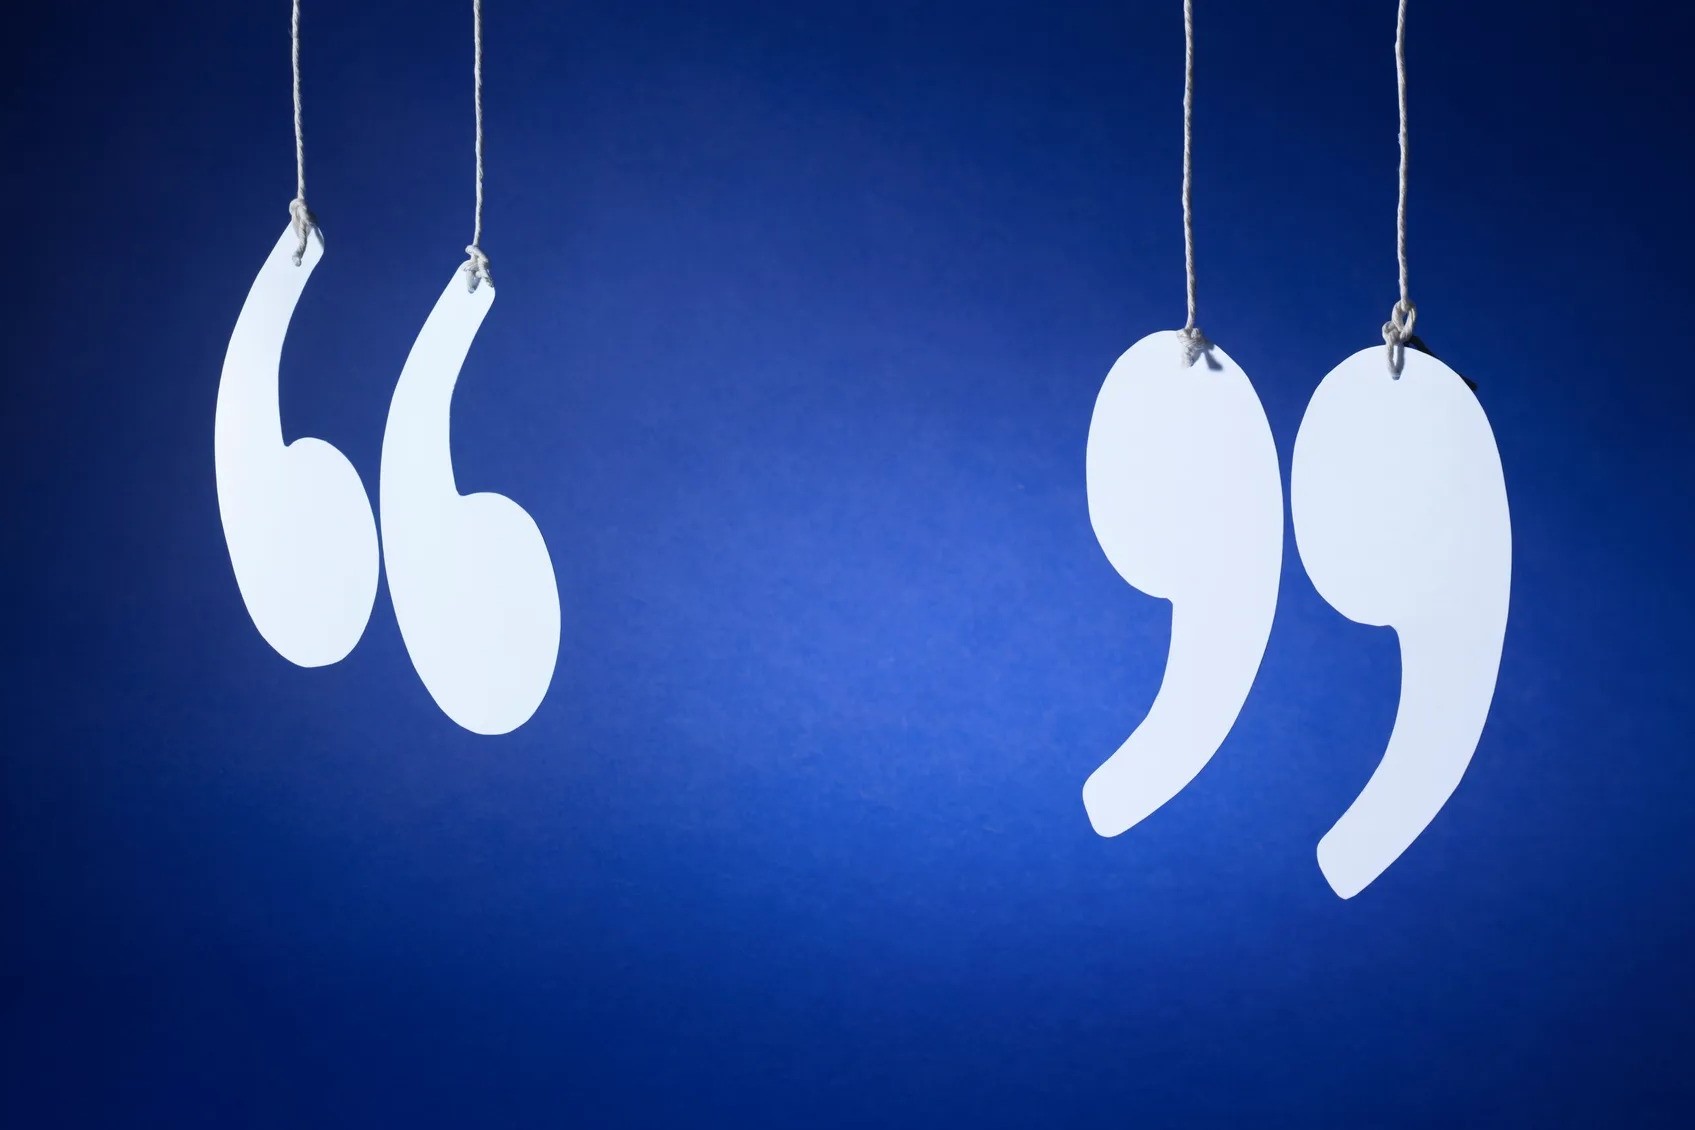 Quote Unquote: The Ultimate Guide To Using Quotation Marks